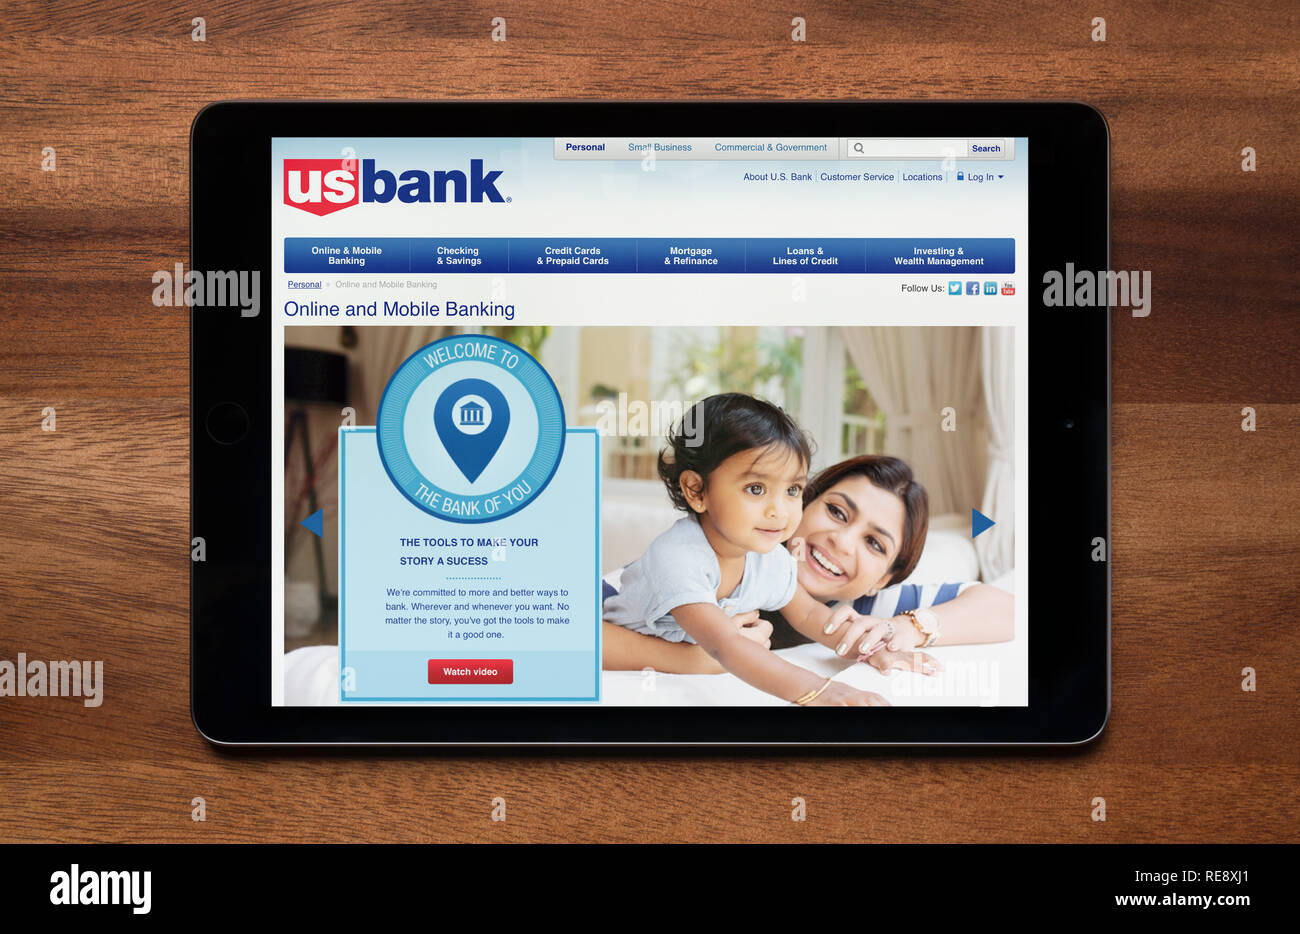 The website of US Bank is seen on an iPad tablet, which is resting on a wooden table (Editorial use only). Stock Photo